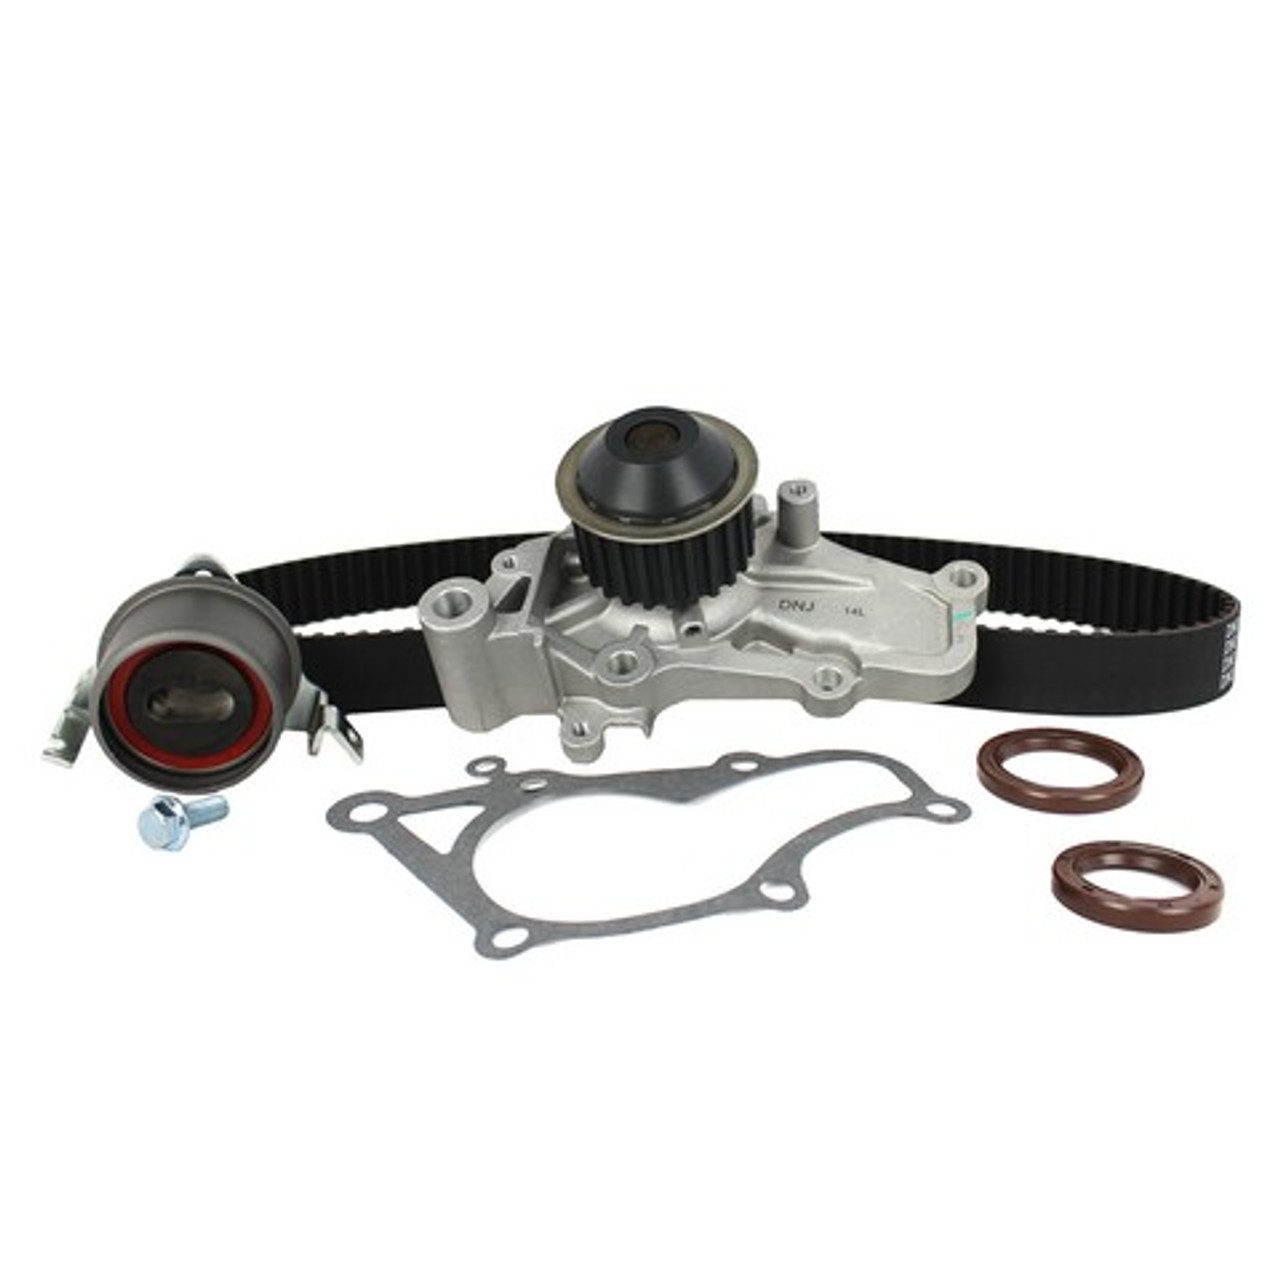 1994 Eagle Summit 1.8L Timing Belt Kit with Water Pump TBK119WP.E3